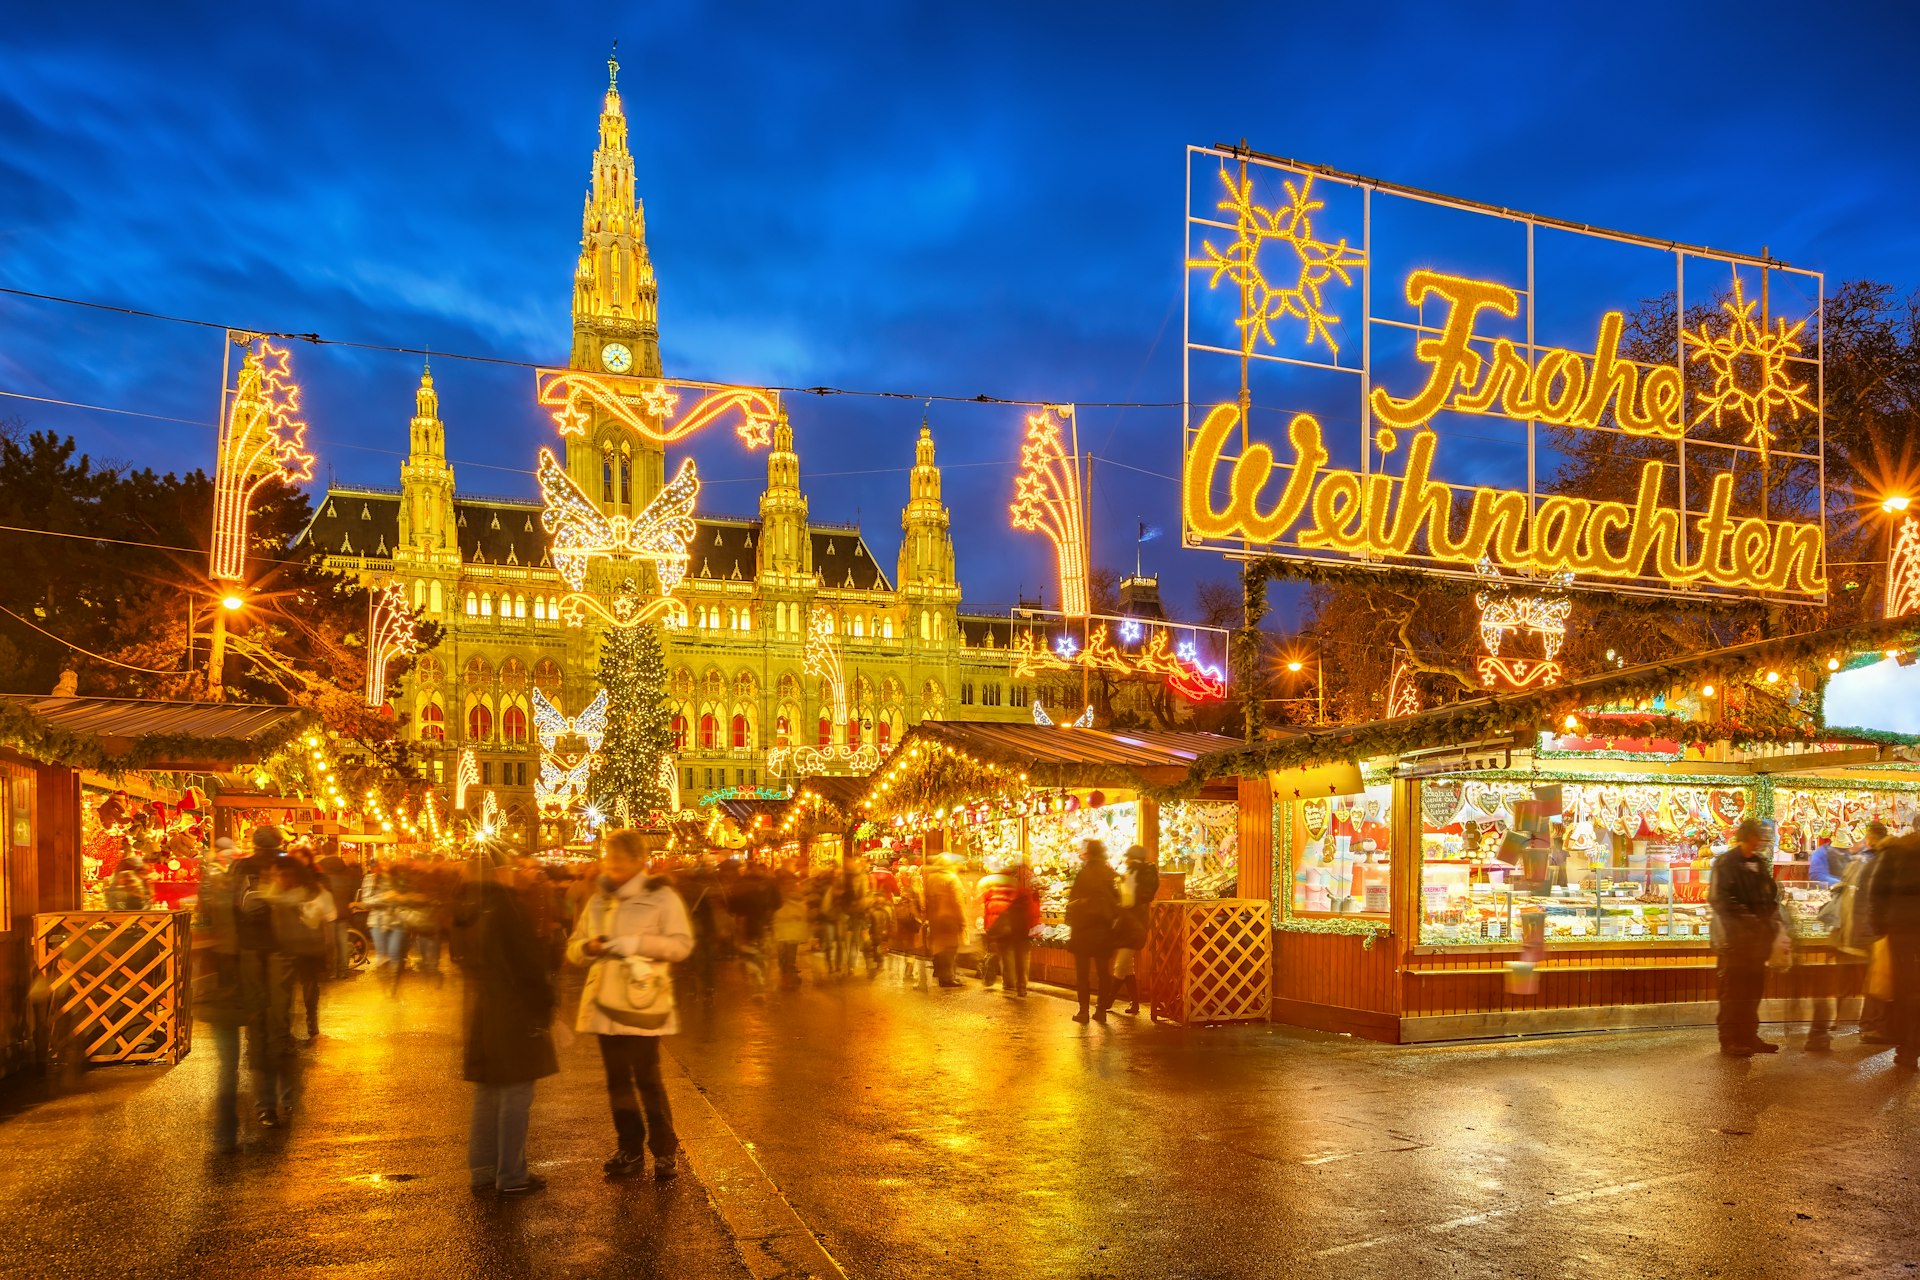 An evening view of the Christmas market in Vienna, with fairy lights illuminating the various market stalls.